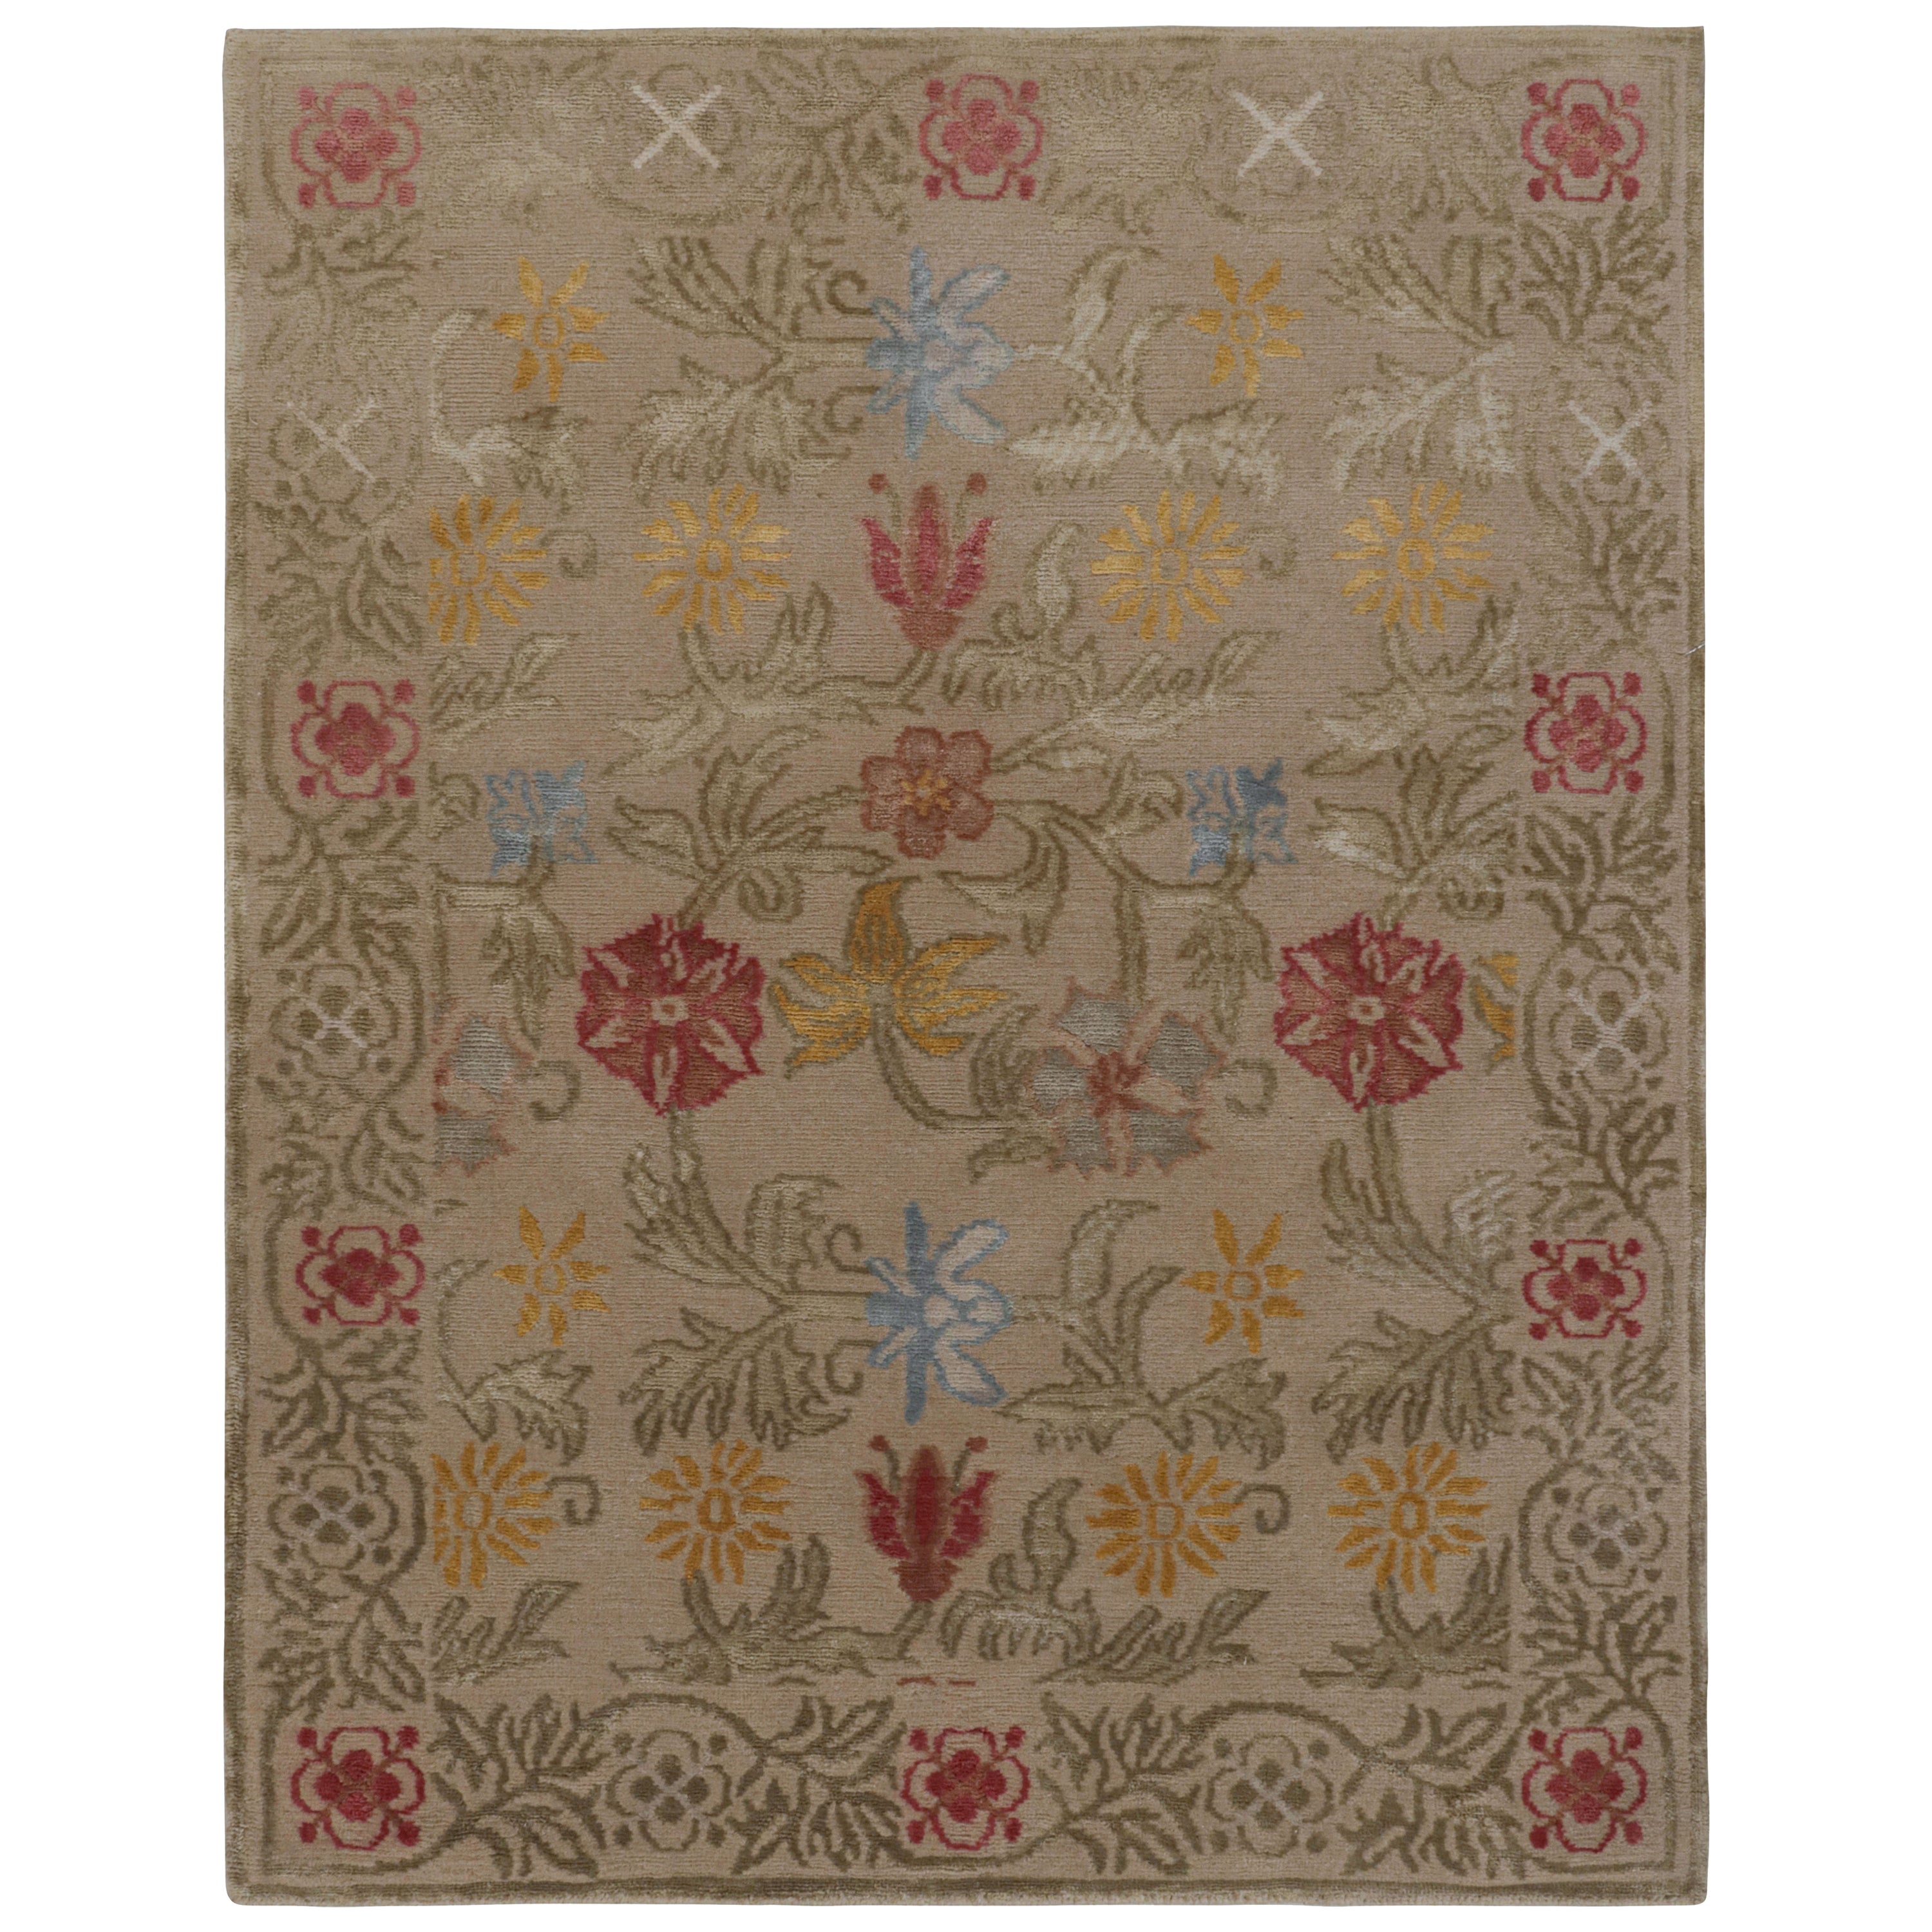 Rug & Kilim’s Spanish European Style Rug in Beige with Floral Patterns “Bilbao”